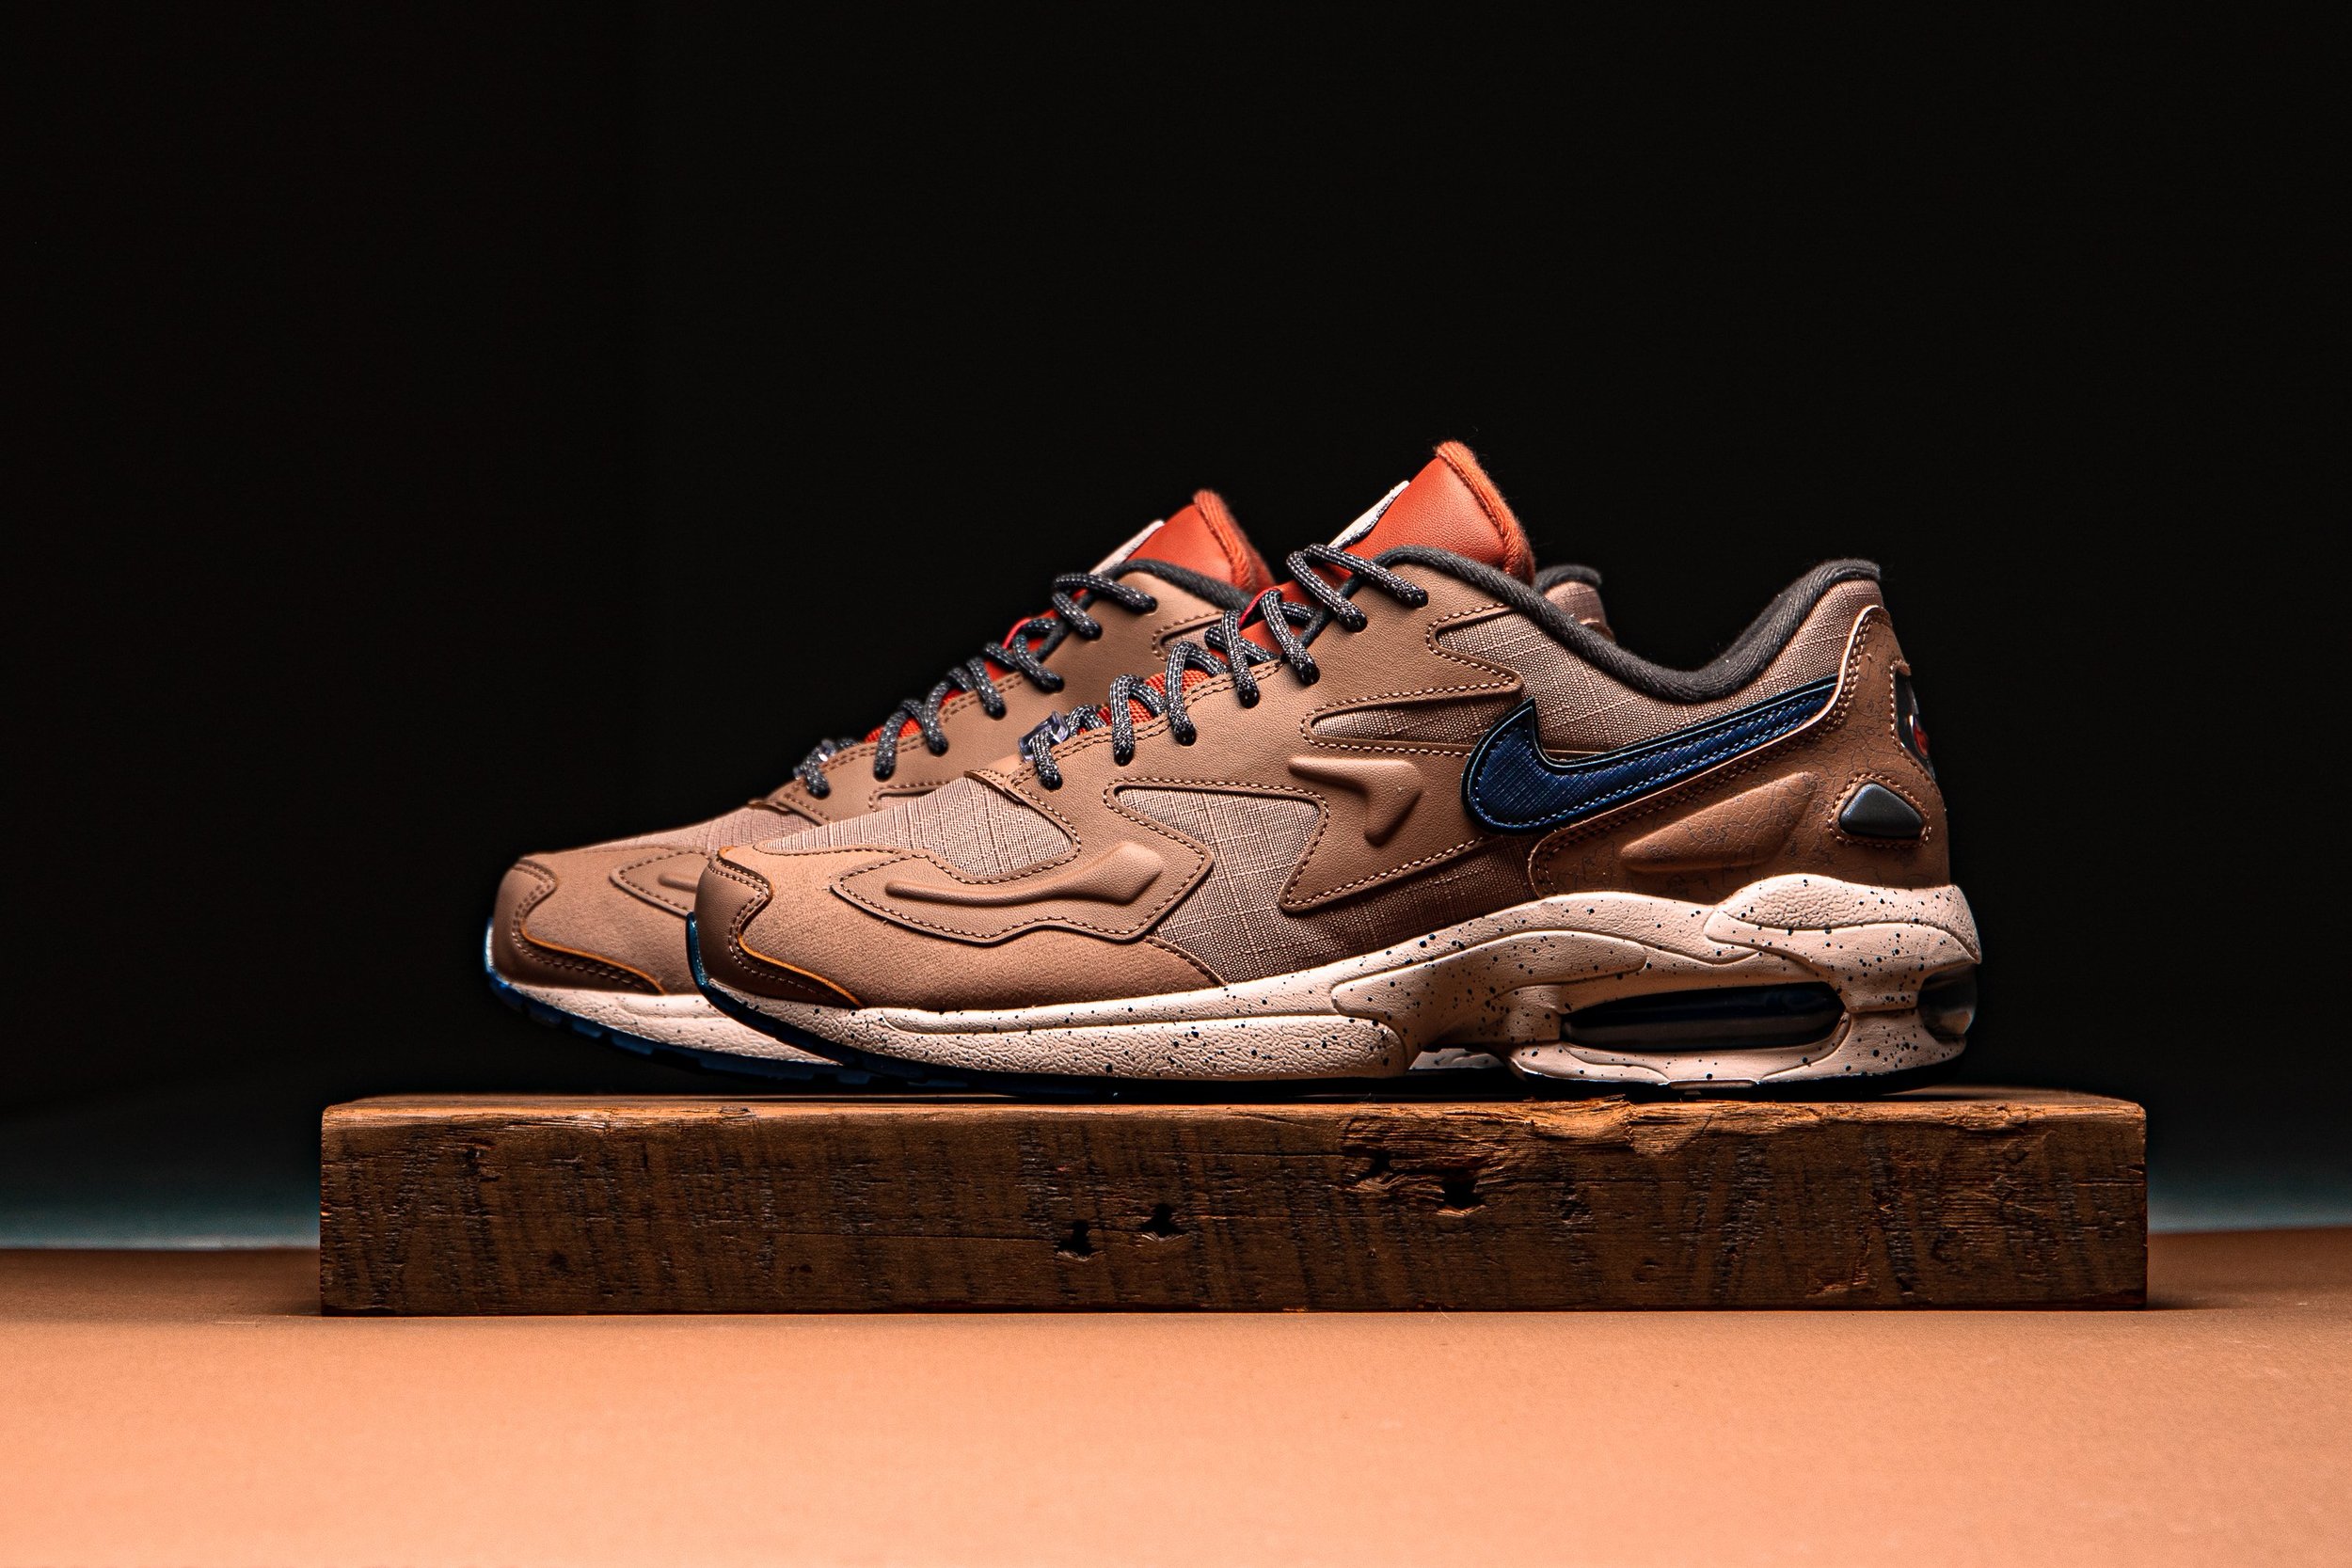 Cop or Can: Nike Air Max2 Light LX 